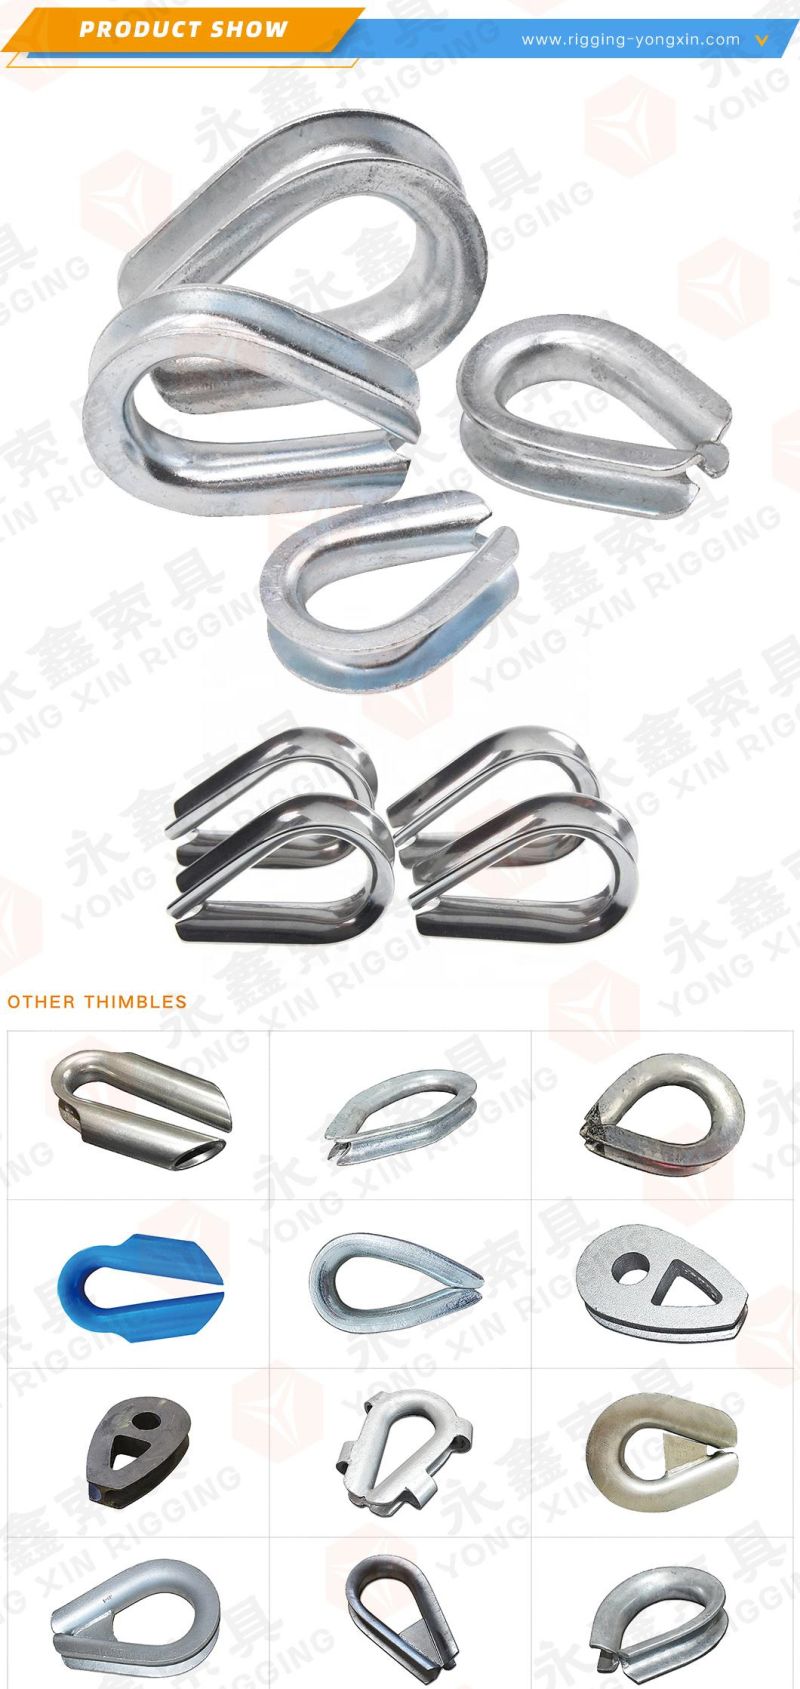 Thimble Thimble Standard G411 Open Wire Rope Thimble Stainless Steel